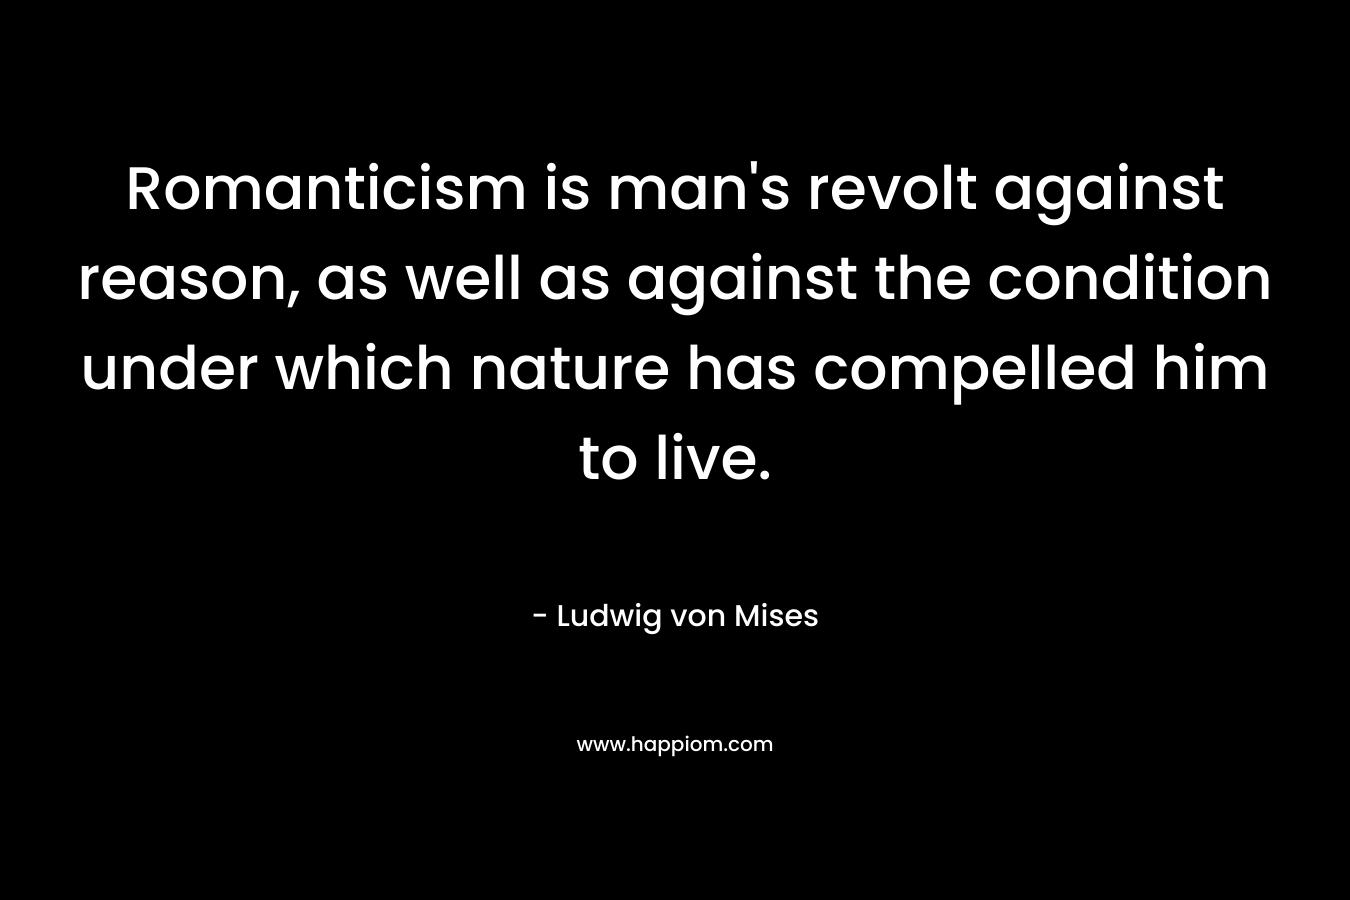 Romanticism is man's revolt against reason, as well as against the condition under which nature has compelled him to live.